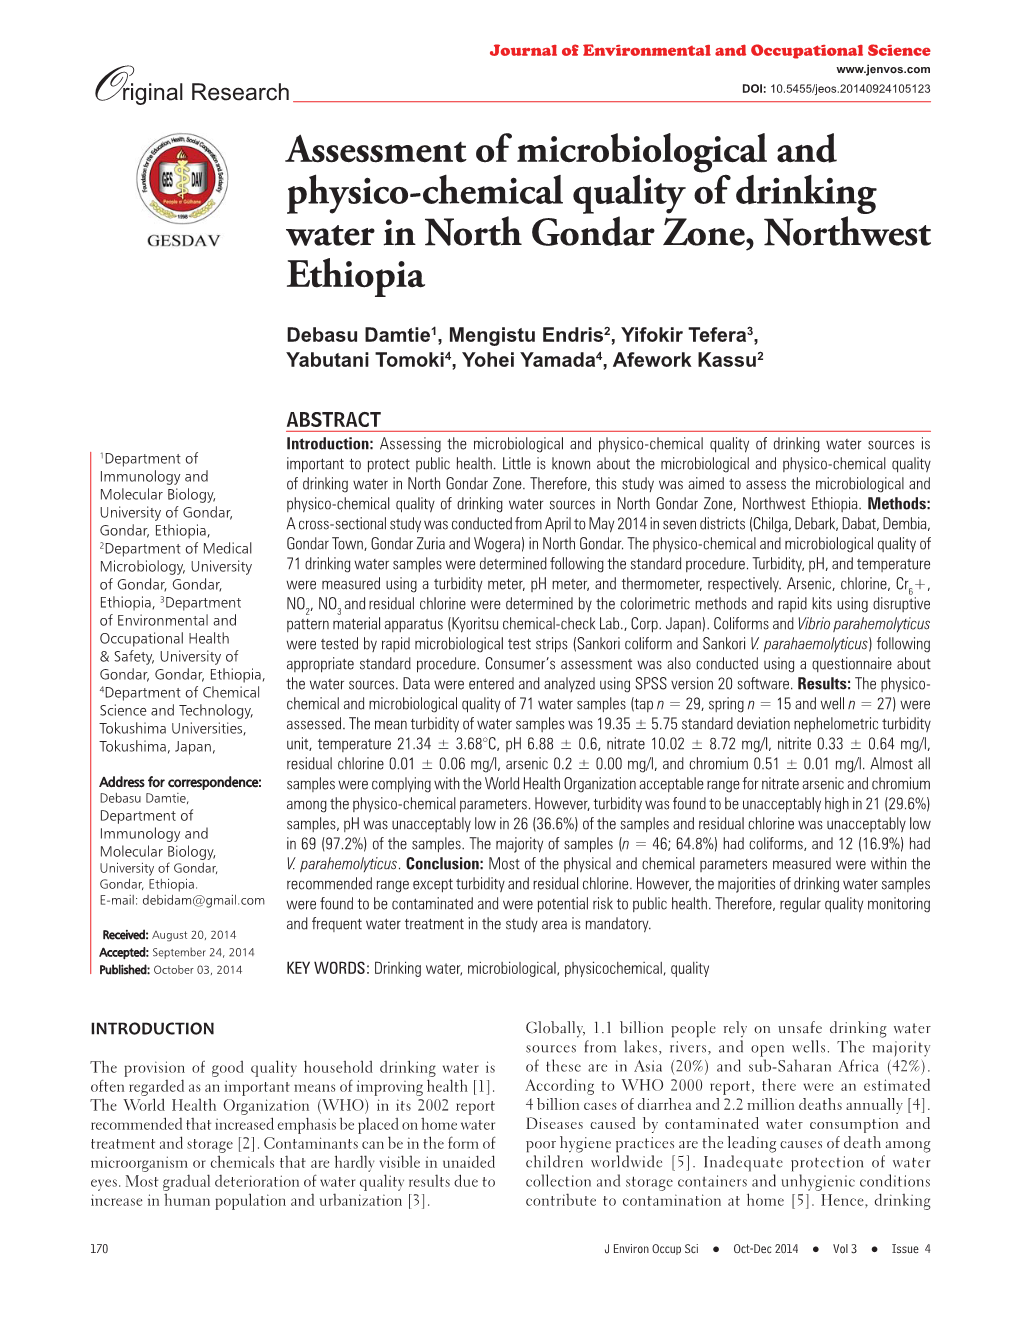 Assessment of Microbiological and Physico-Chemical Quality of Drinking Water in North Gondar Zone, Northwest Ethiopia